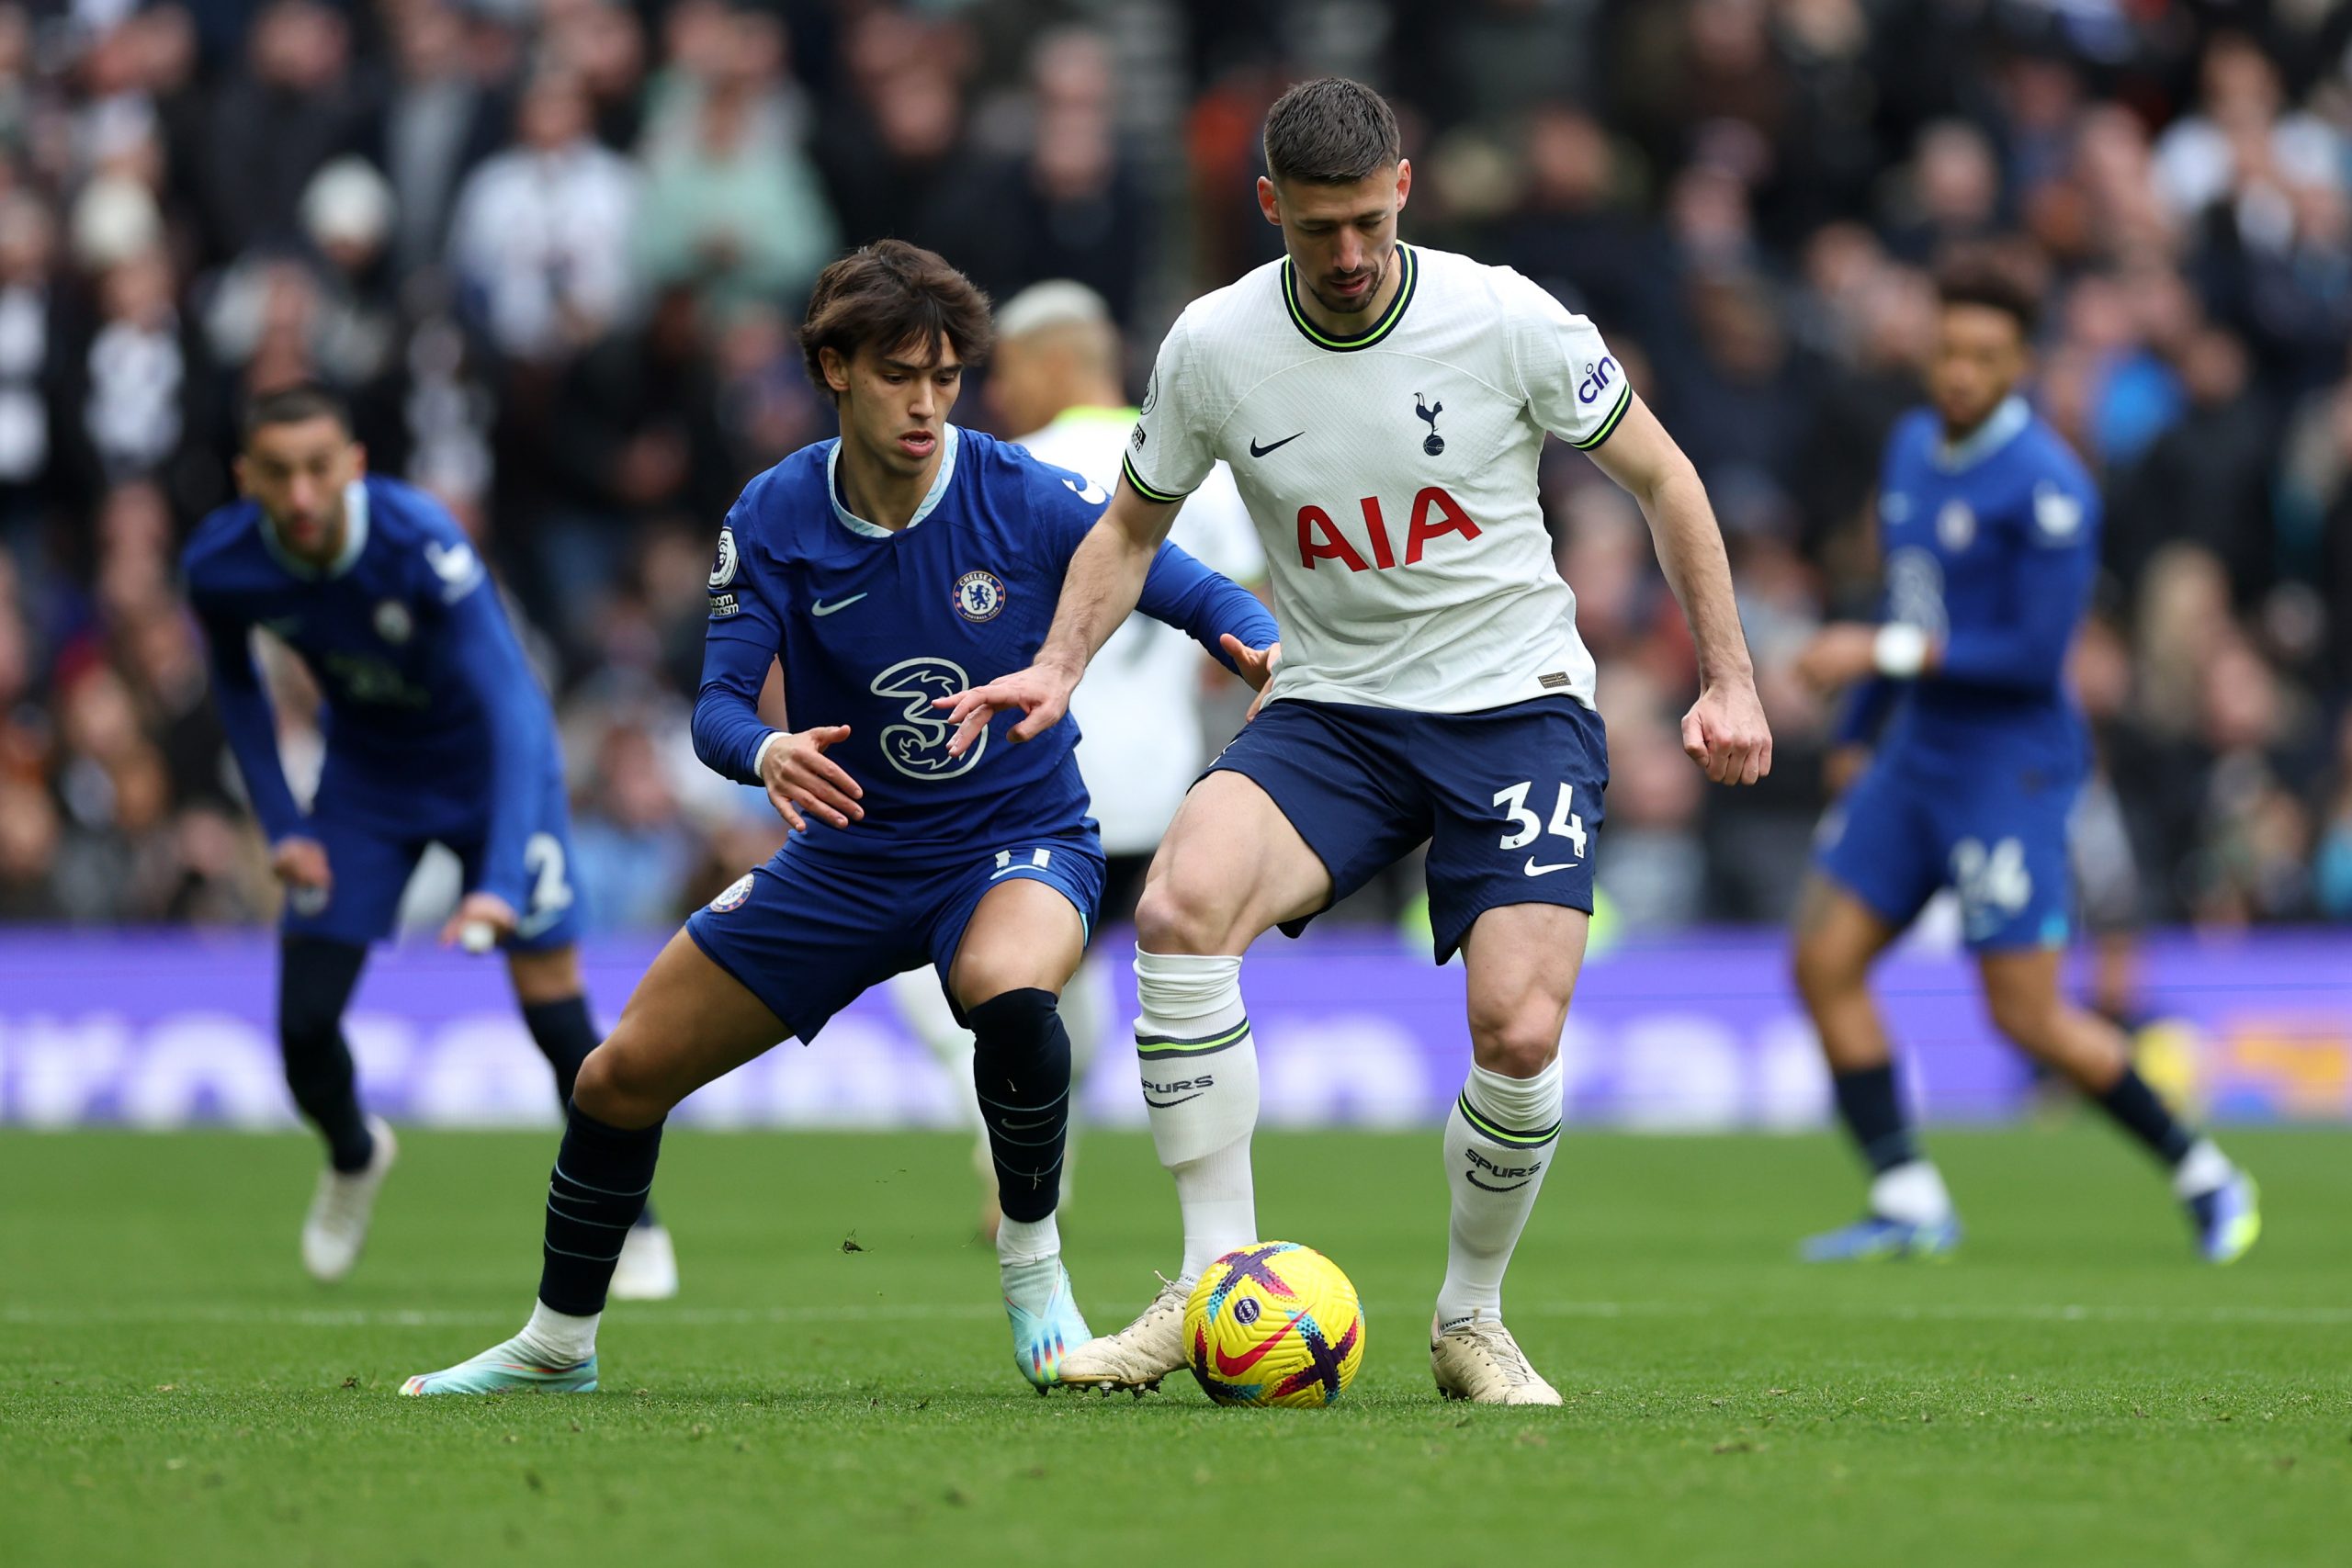 Clement Lenglet of Tottenham Hotspur carries the ball as Joao Felix of Chelsea watches on. (Photo by Catherine Ivill/Getty Images)